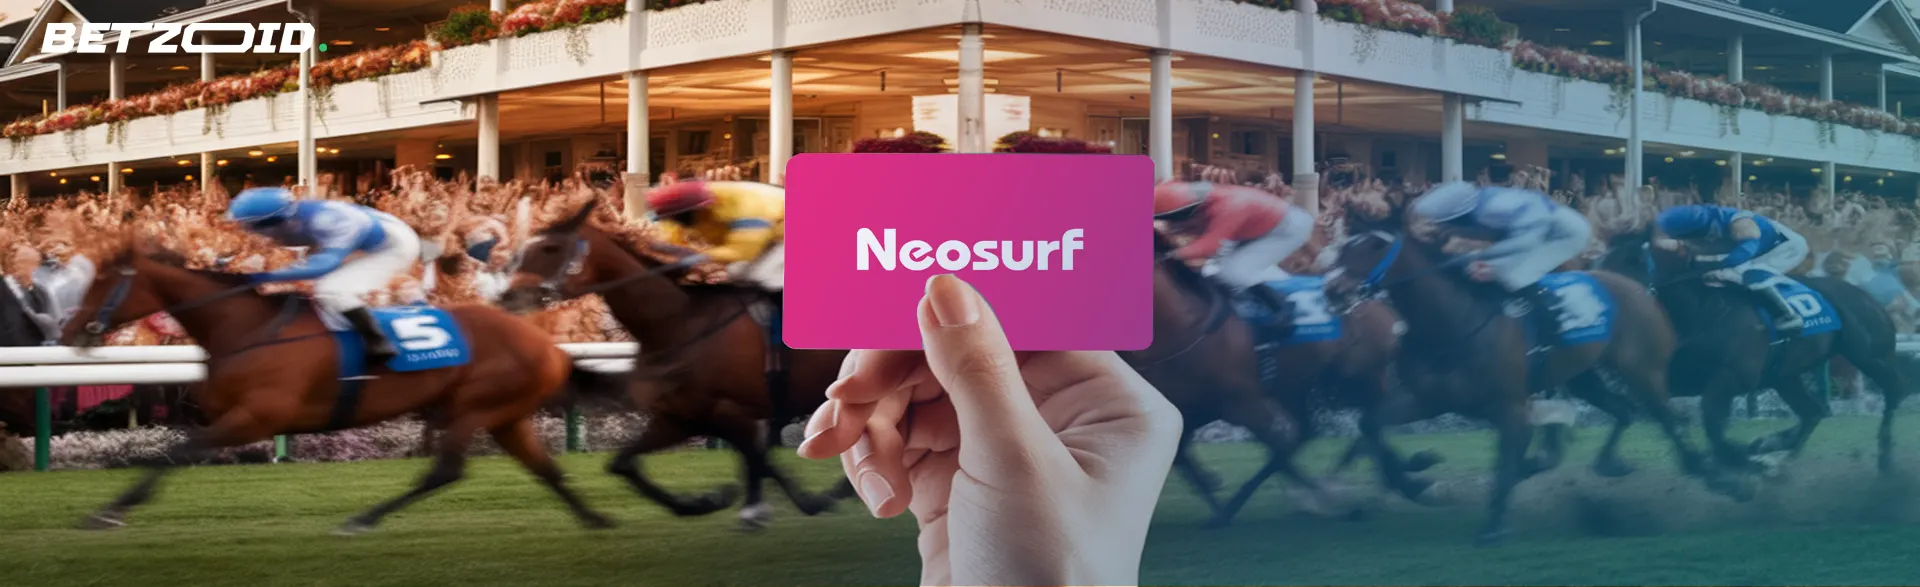 Popular sports for betting with Neosurf.